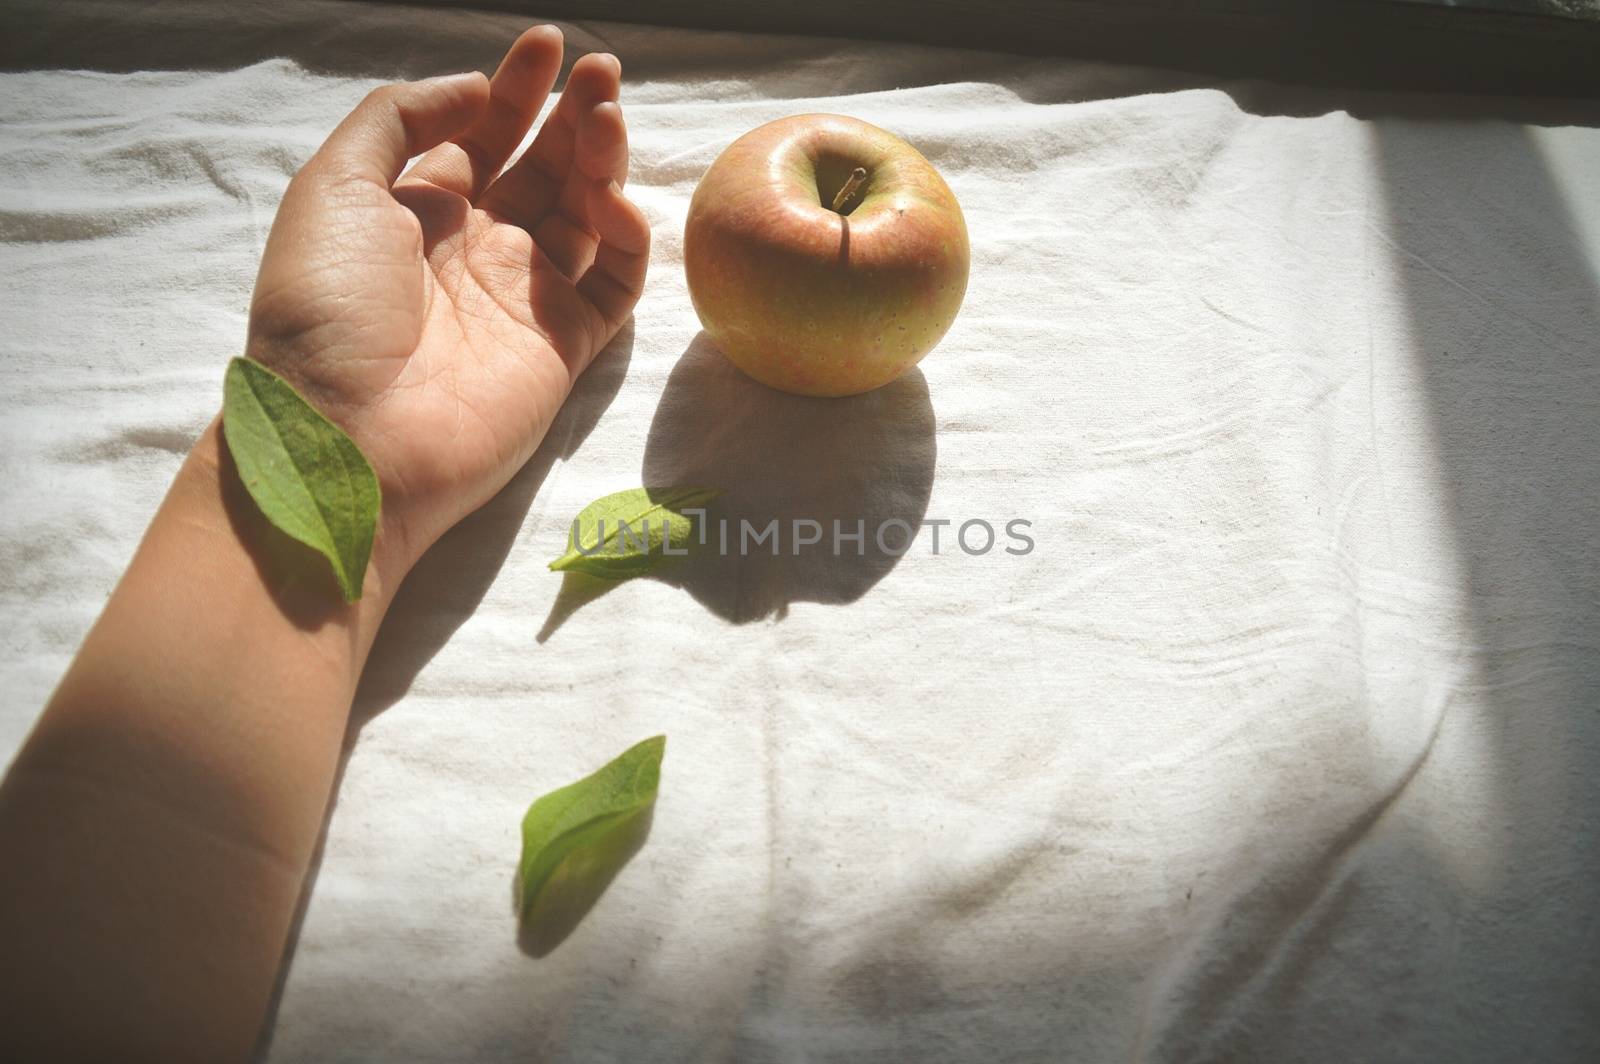 Leaf covering the wrist hand and an apple against a white bed sheet showing concept of Mental Health and Suicide Prevention